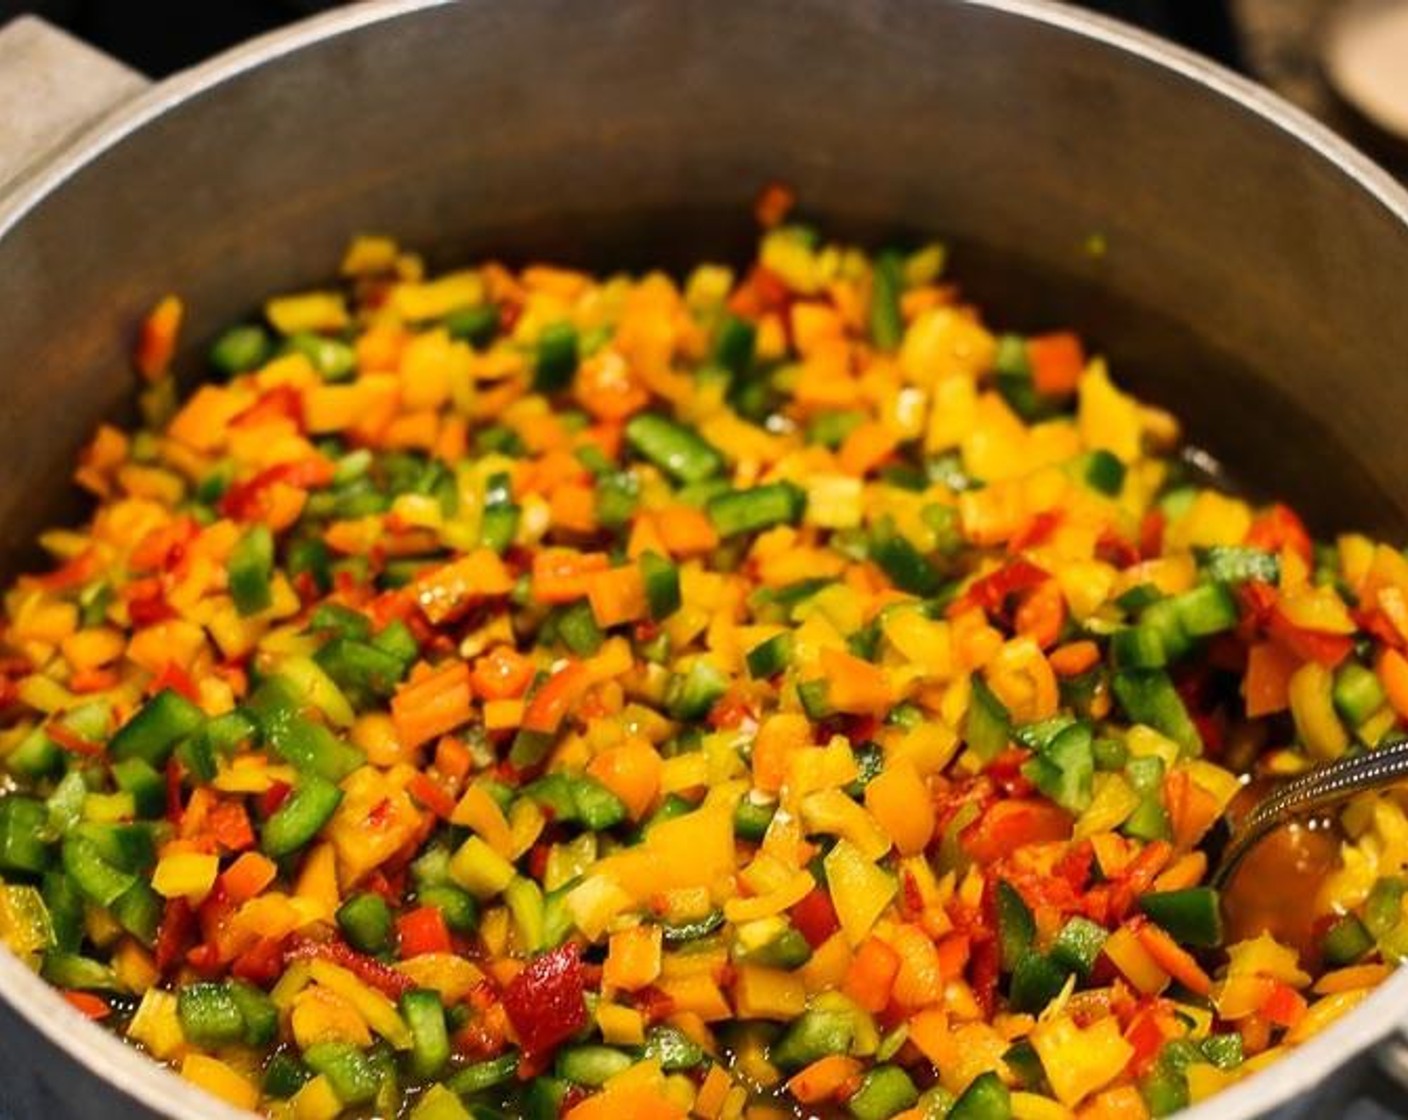 step 2 Place Jalapeño Pepper (1/4), Green Bell Peppers (1 1/4 cups), Red Bell Peppers (1 1/2 cups) and Yellow Bell Pepper (1 cup) in a large saucepan over high heat. Mix in Apple Cider Vinegar (1 cup) and Fruit Pectin Powder (3 1/2 Tbsp) Stir constantly. Bring to a rolling boil. Remove from heat.